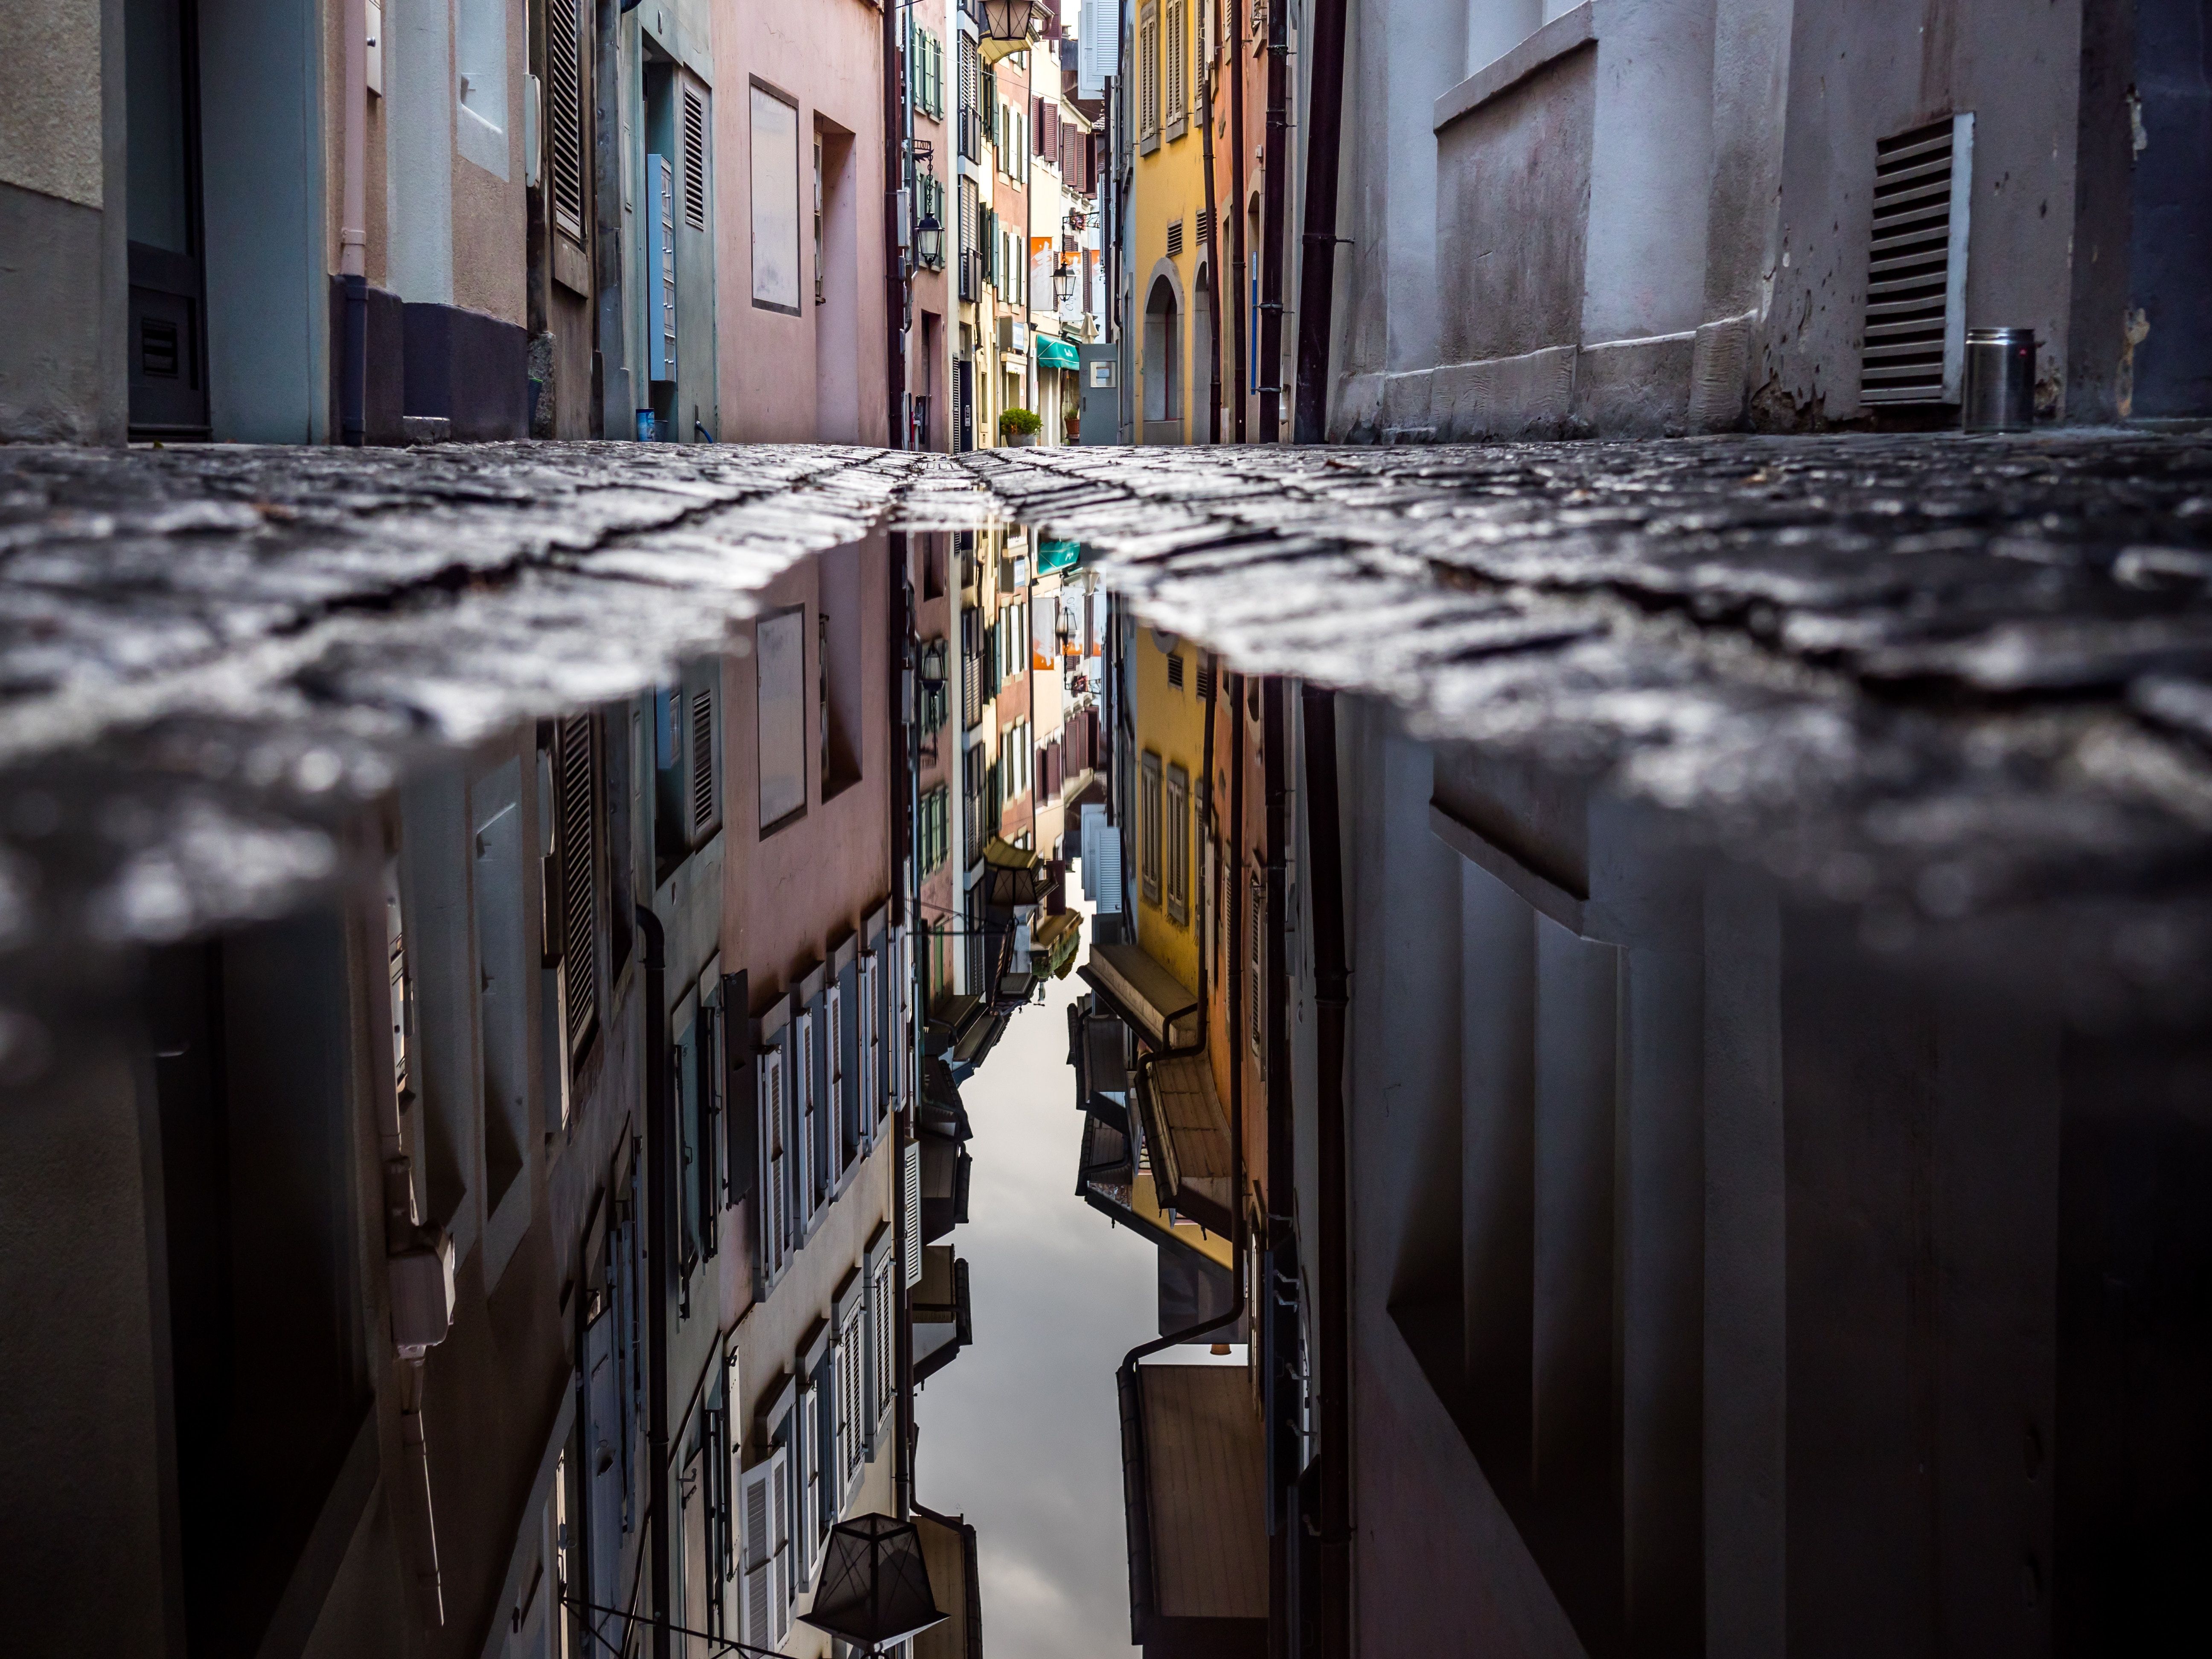 5184x3888 #water, #puddle, #alley, #street, #city